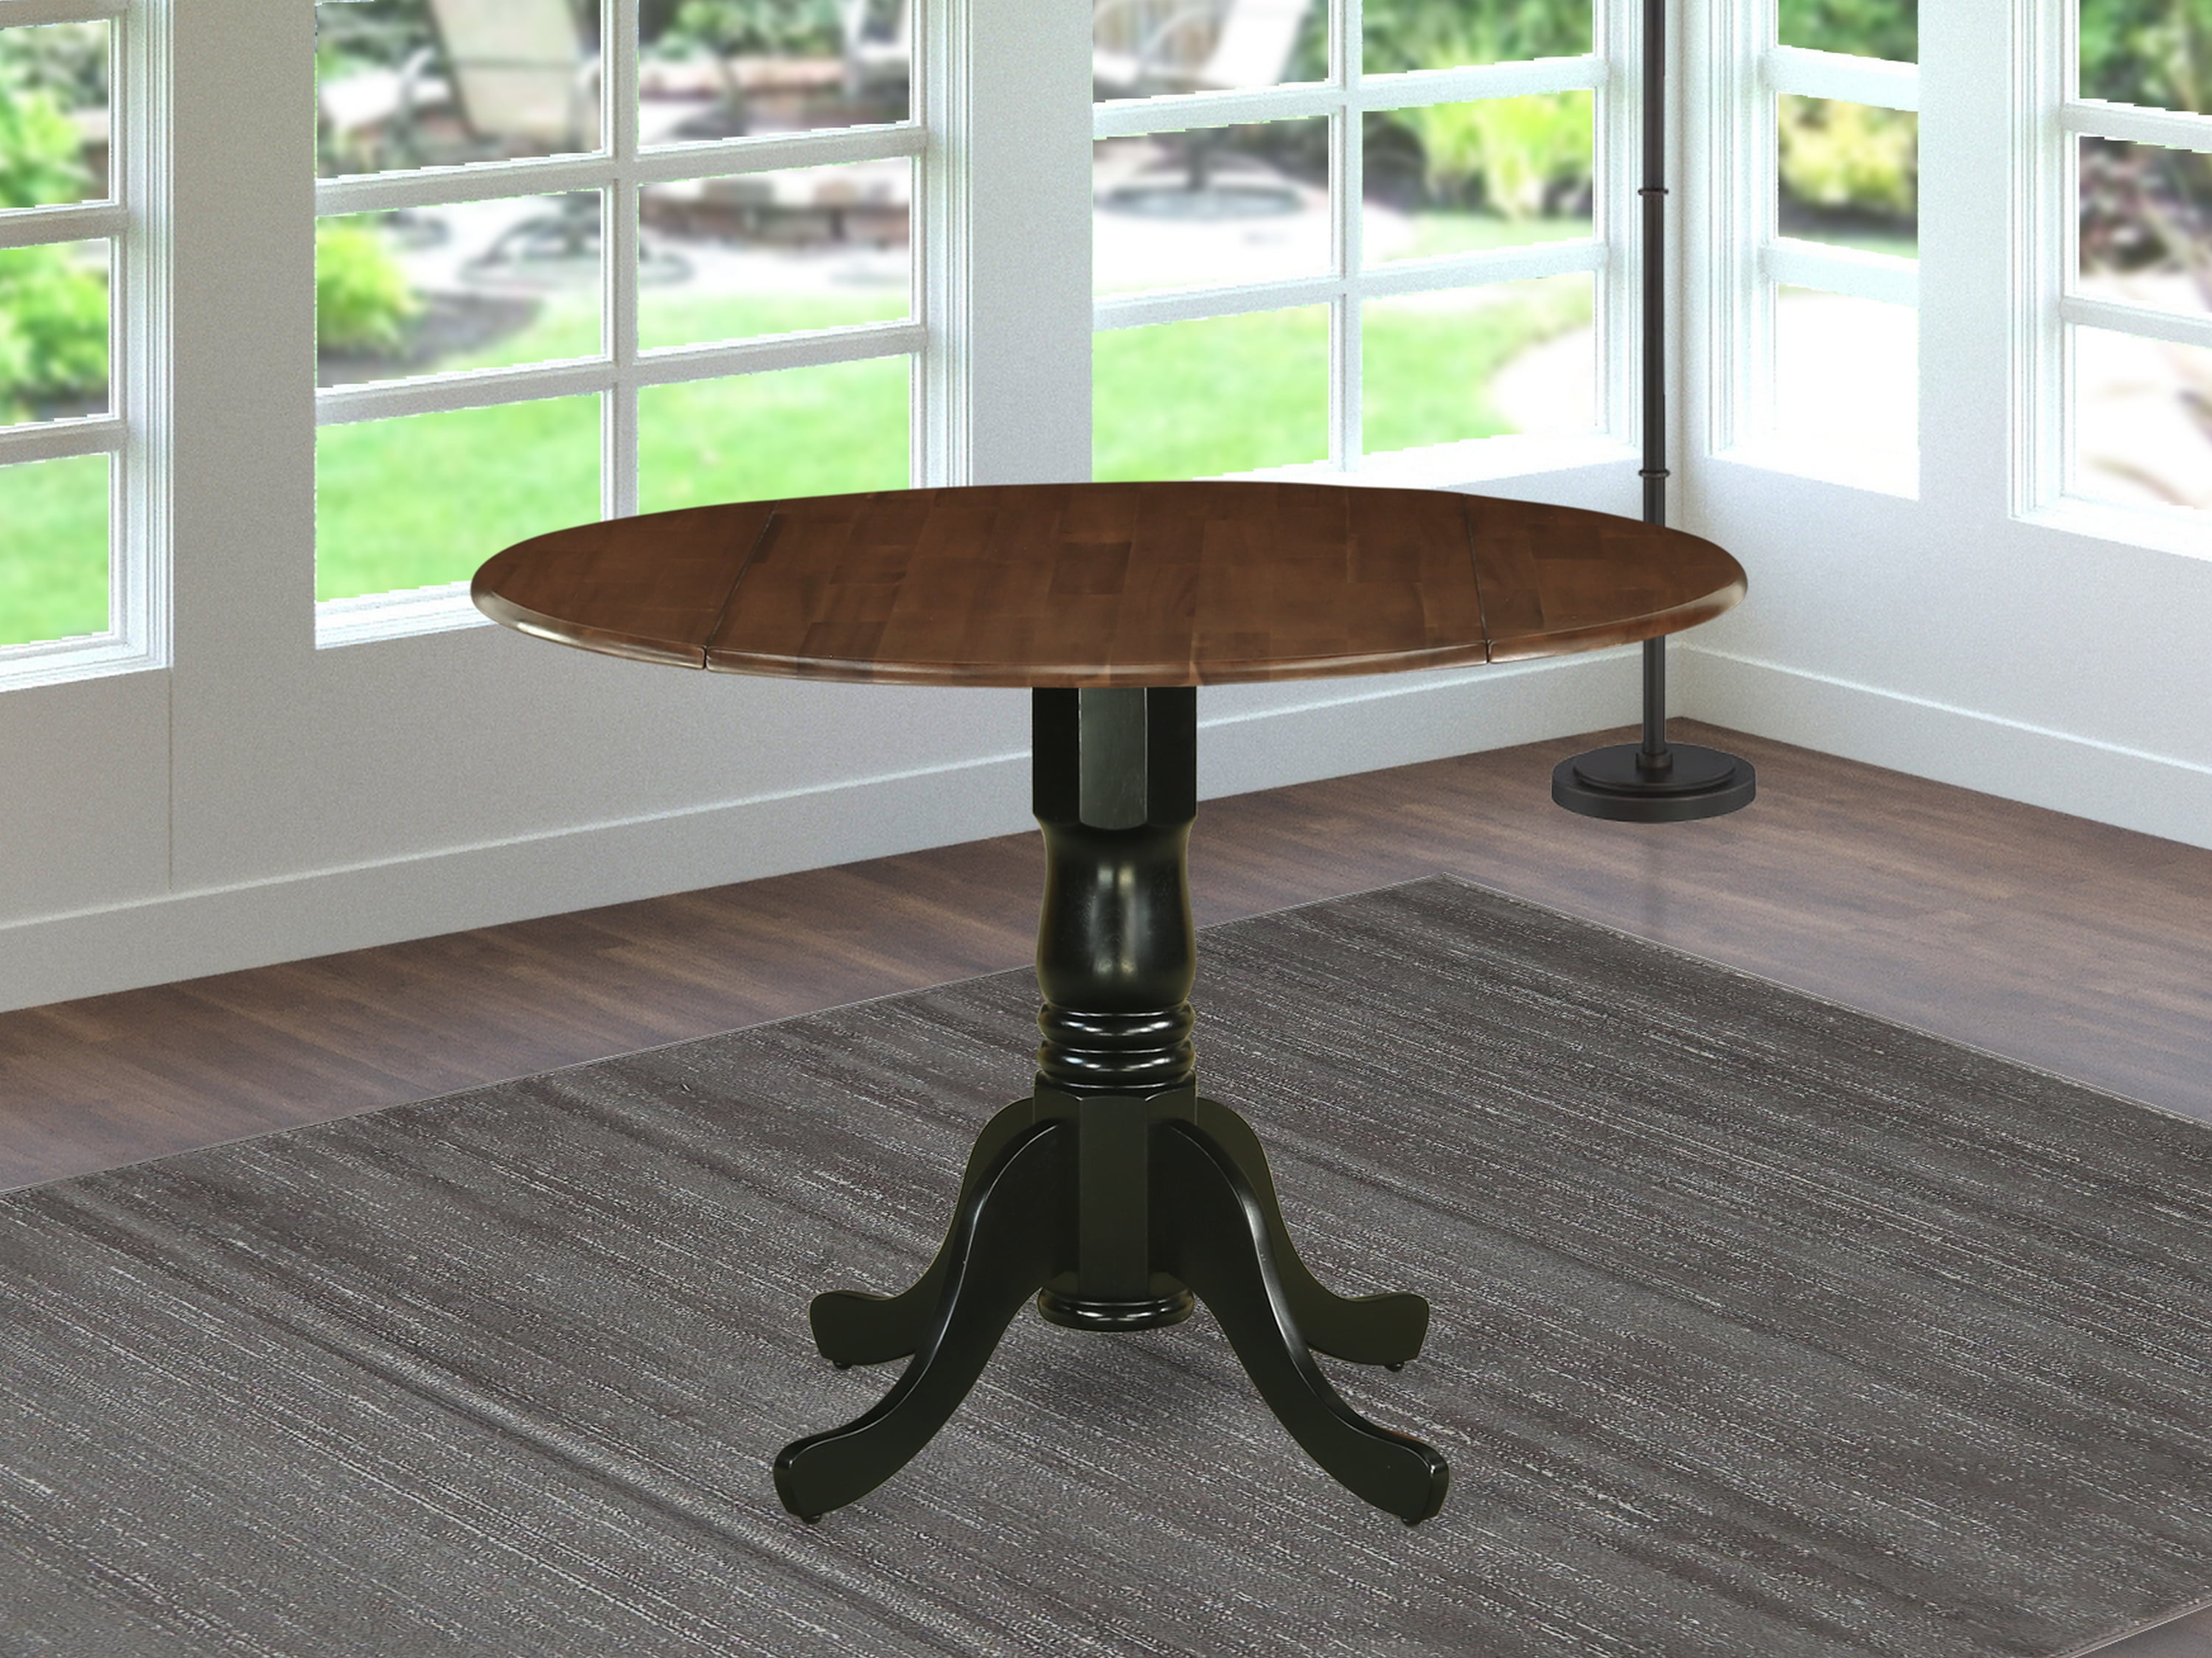 Dmt Wbk Tp Dublin Dining Table Made Of, How Big Is A 42 Inch Round Table